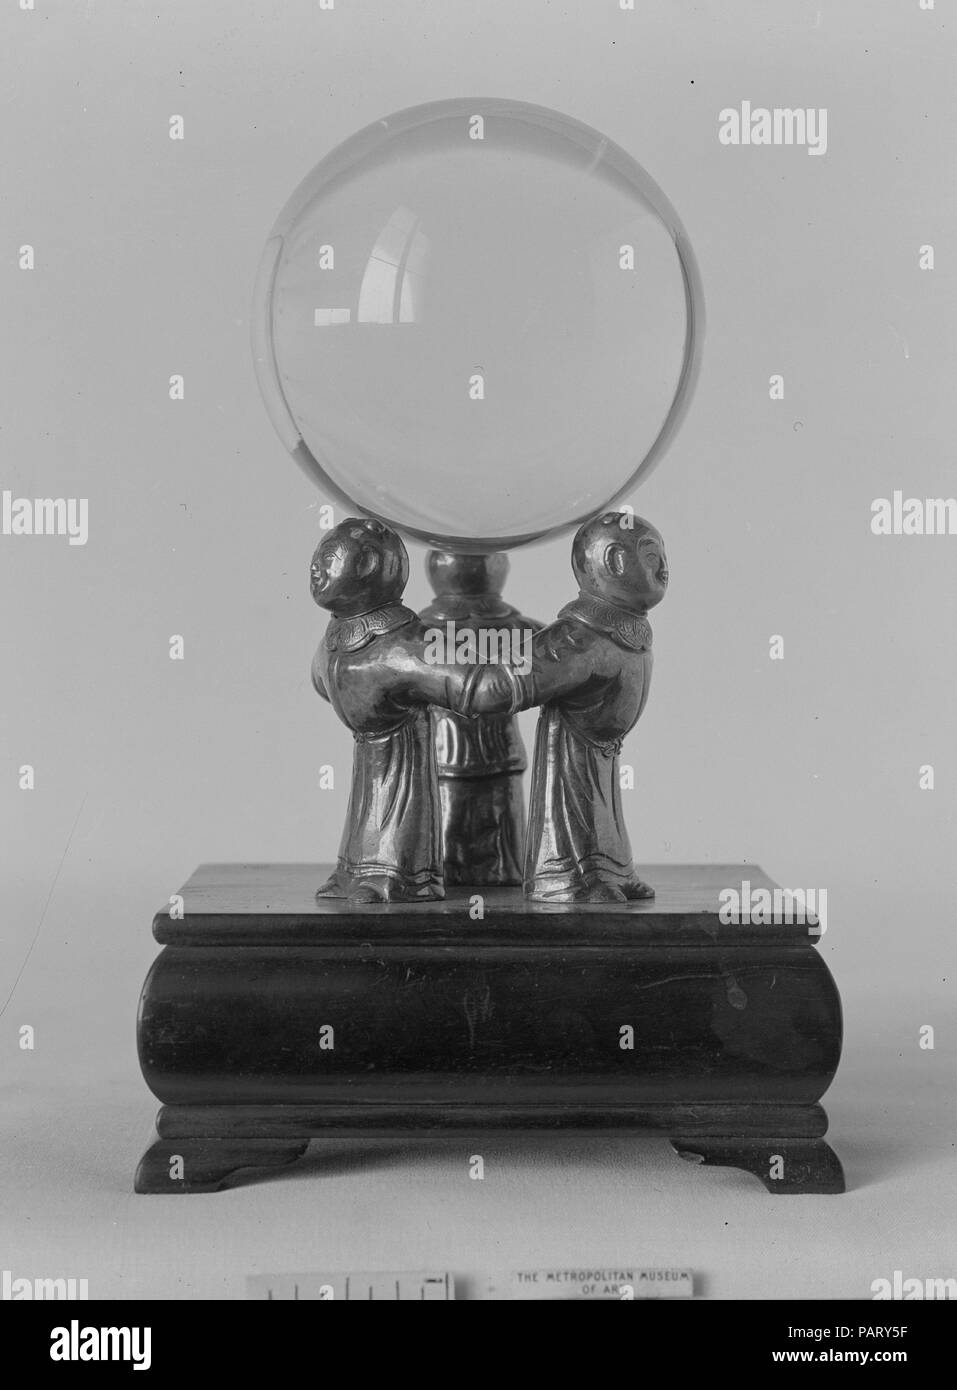 Crystal Ball on a Silver Stand composed of Three Figures. Culture: China. Dimensions: Diam. 2 9/16 in. (6.5 cm). Date: 18th century. Museum: Metropolitan Museum of Art, New York, USA. Stock Photo